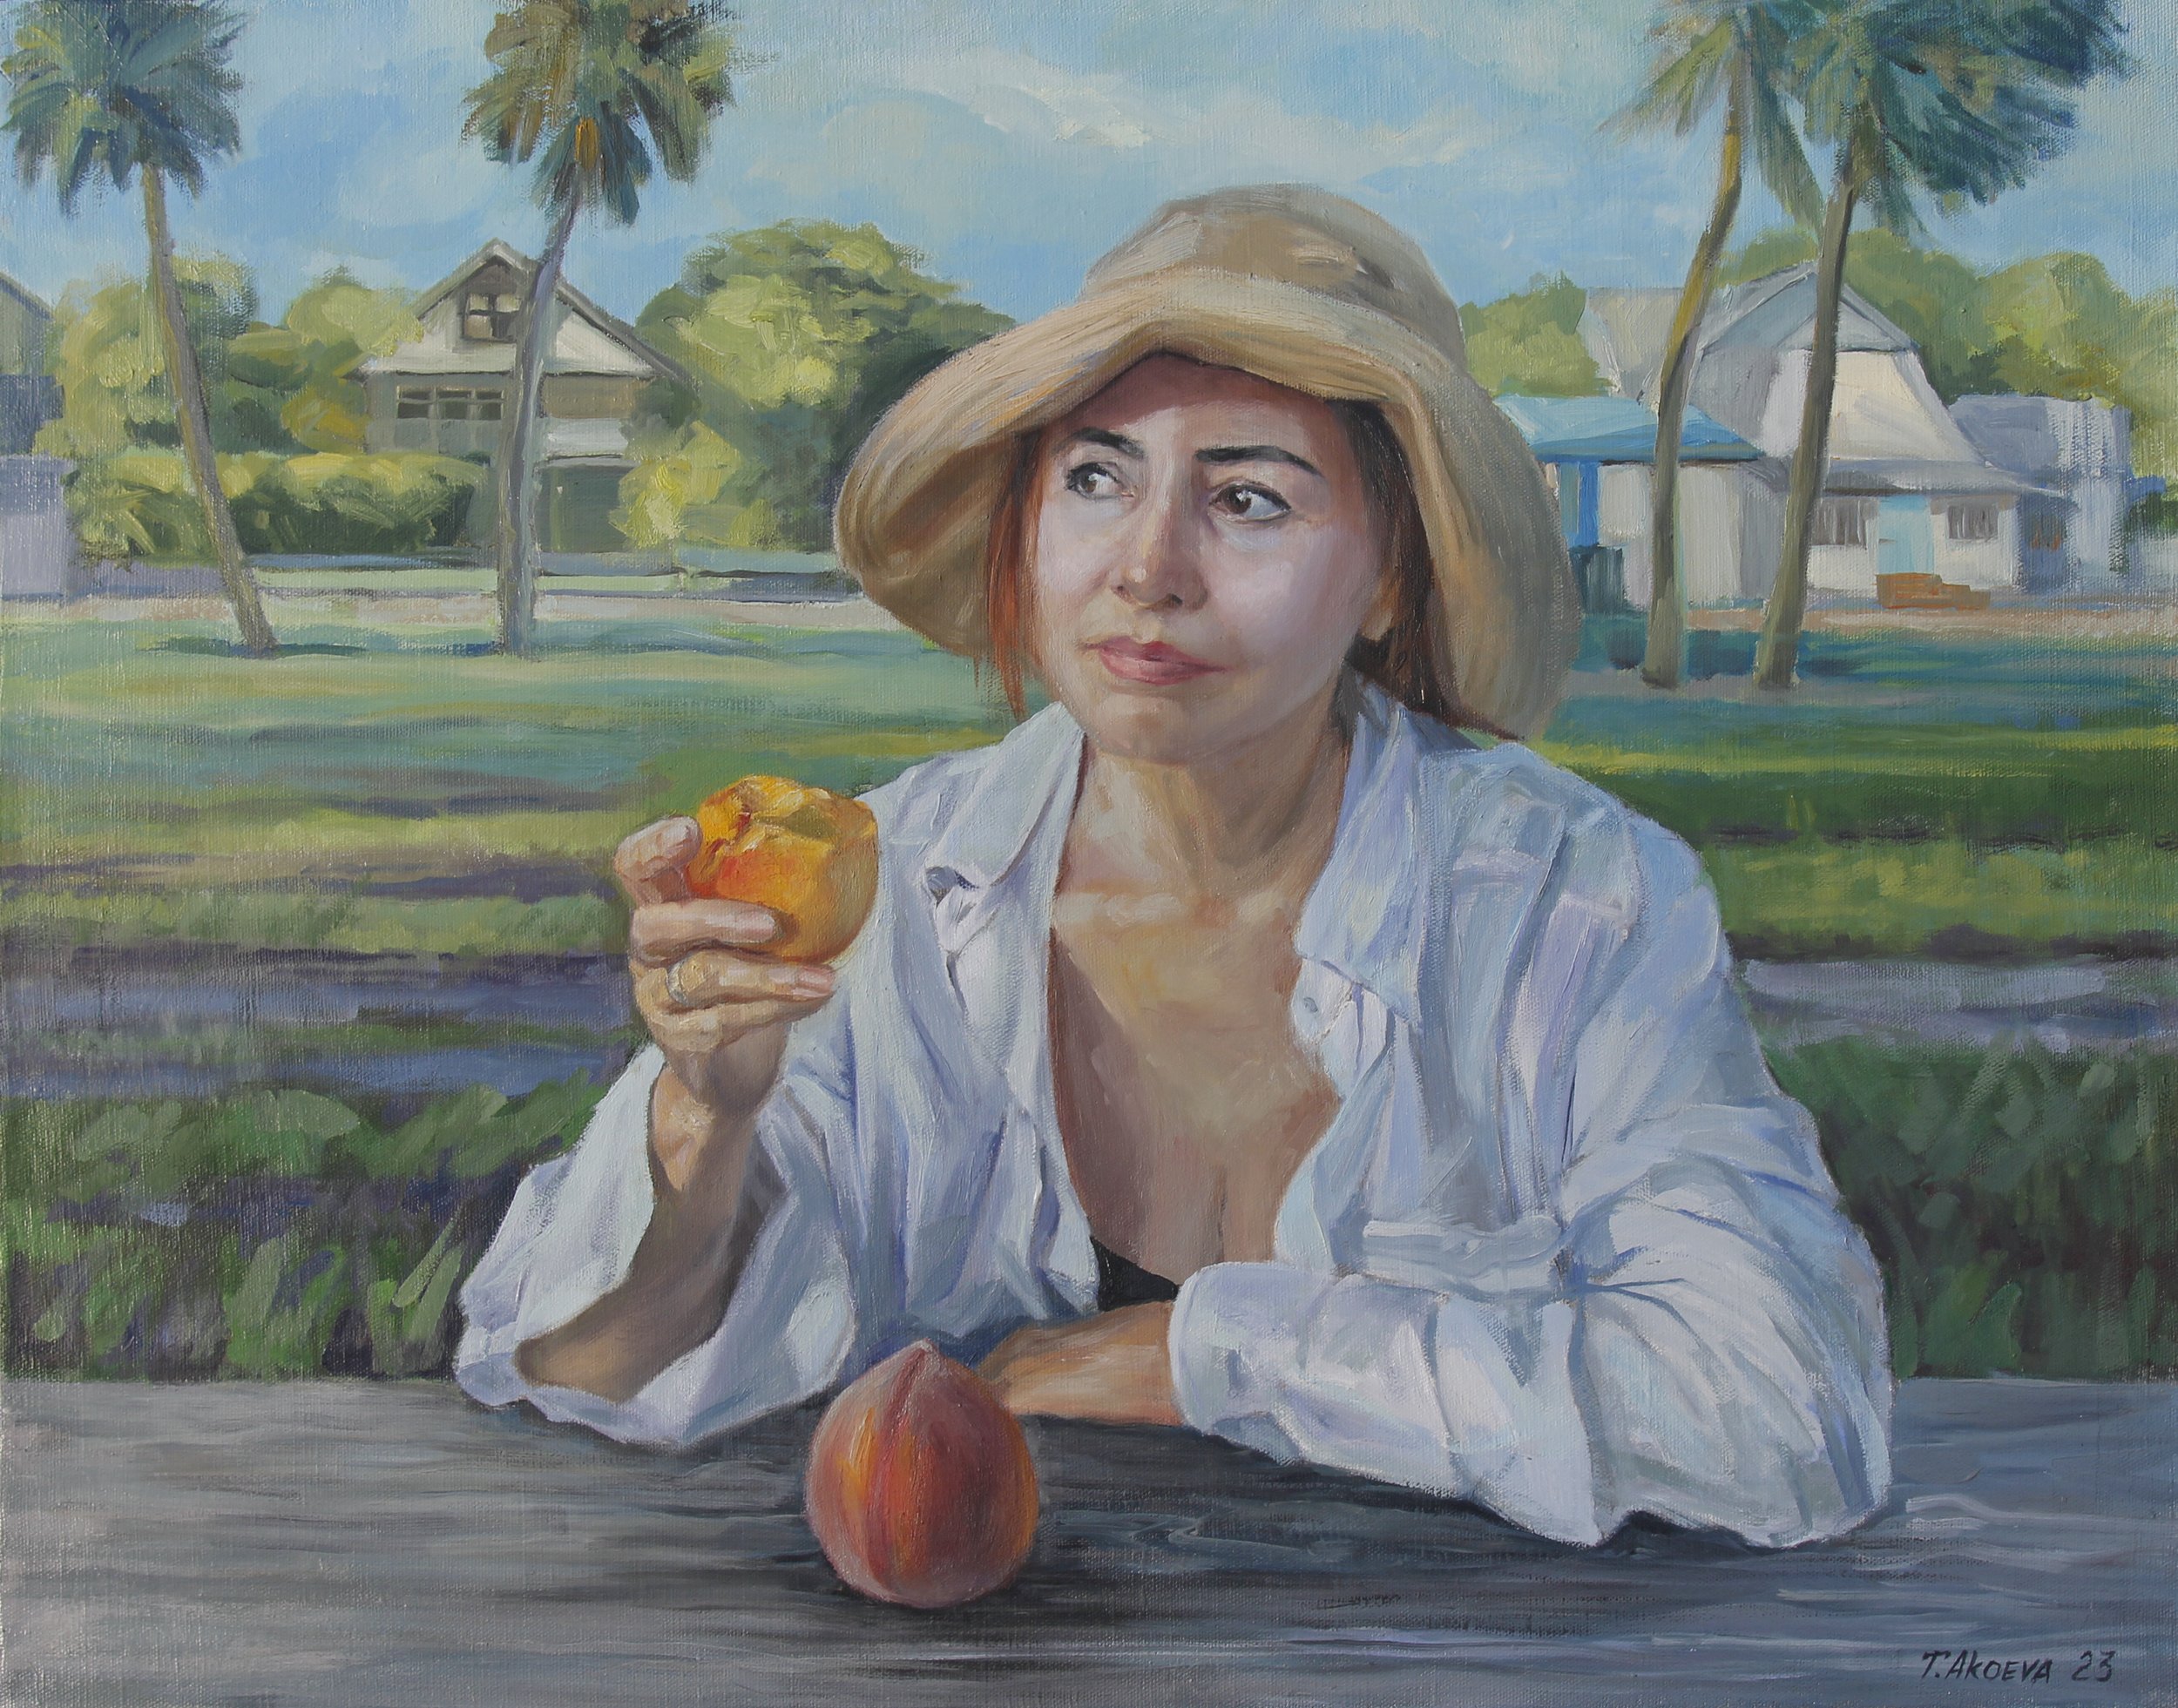 Tanya with peaches at Holmes Beach, 2023 Oil on linen, 22x28". Private Collection.